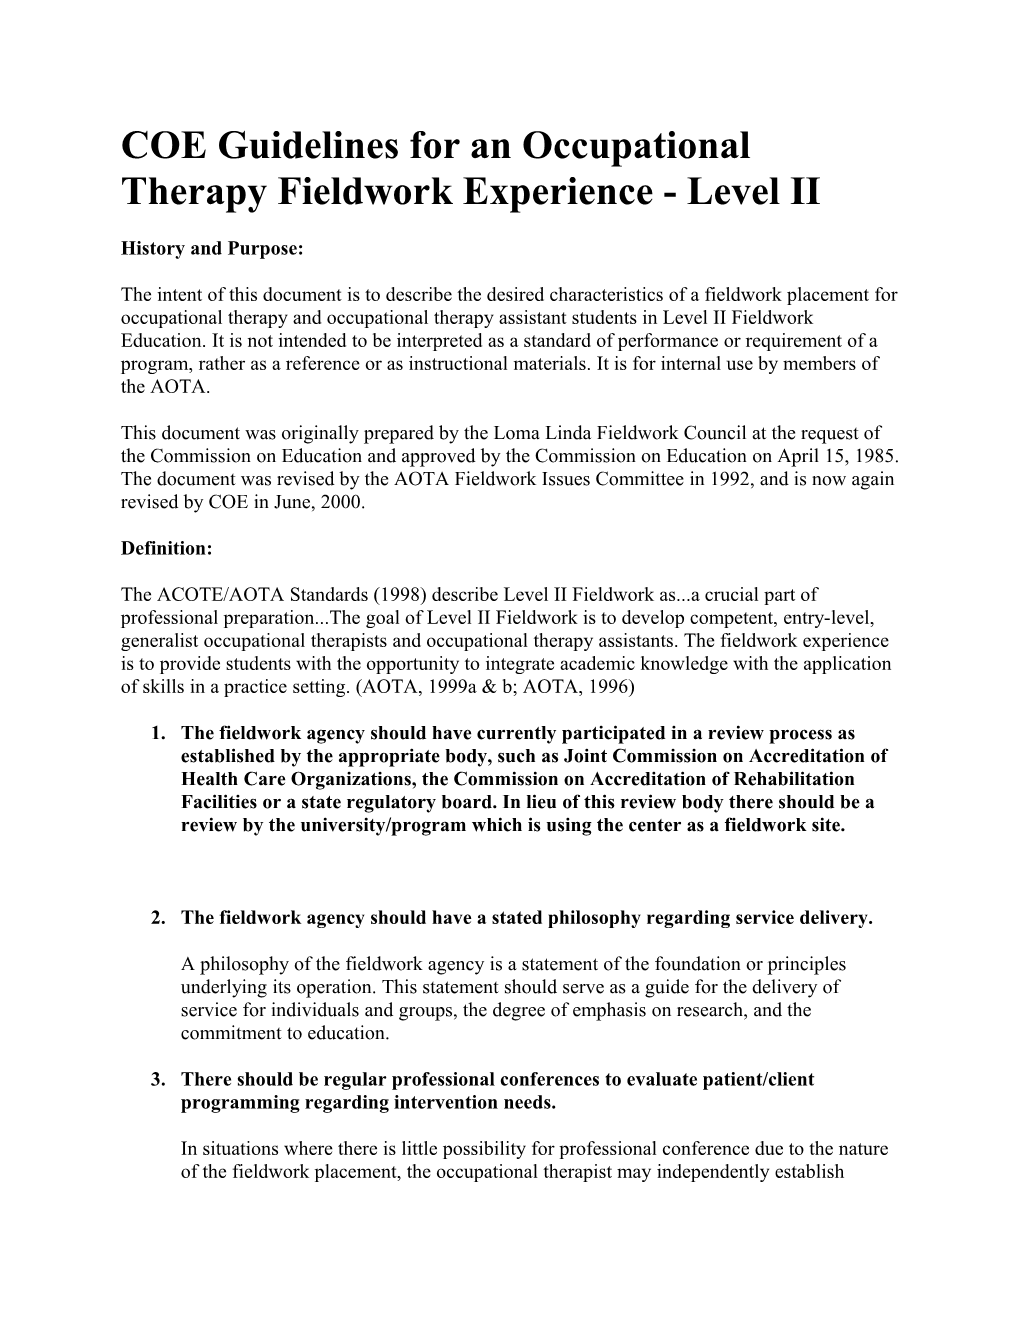 COE Guidelines for an Occupational Therapy Fieldwork Experience - Level II